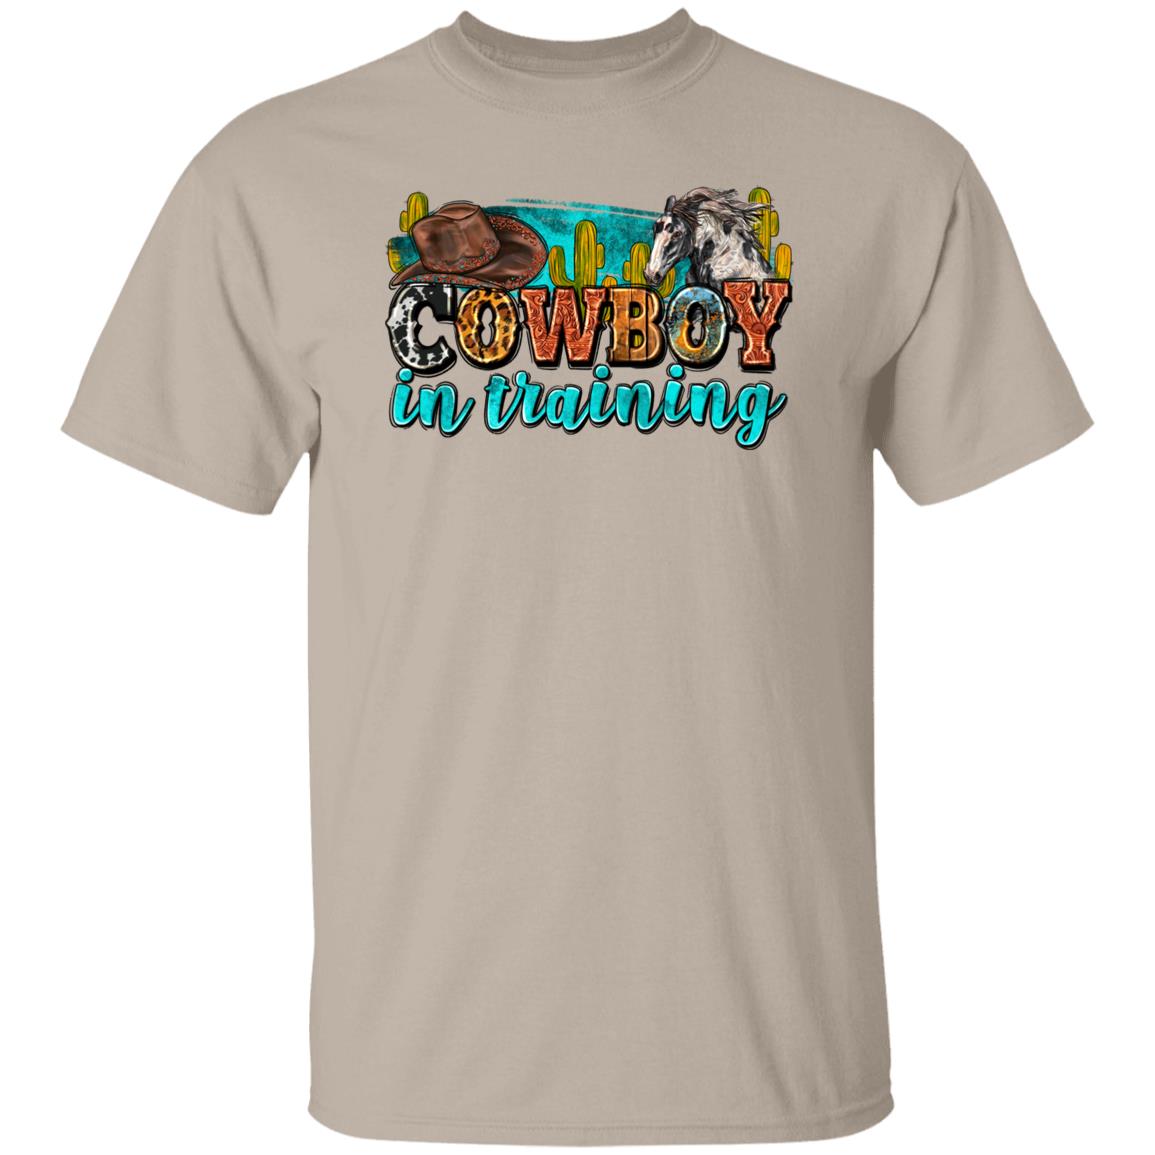 Cowboy in training T-Shirt Texas Western young cowboy Unisex tee White Sand Sport Grey-Sand-Family-Gift-Planet